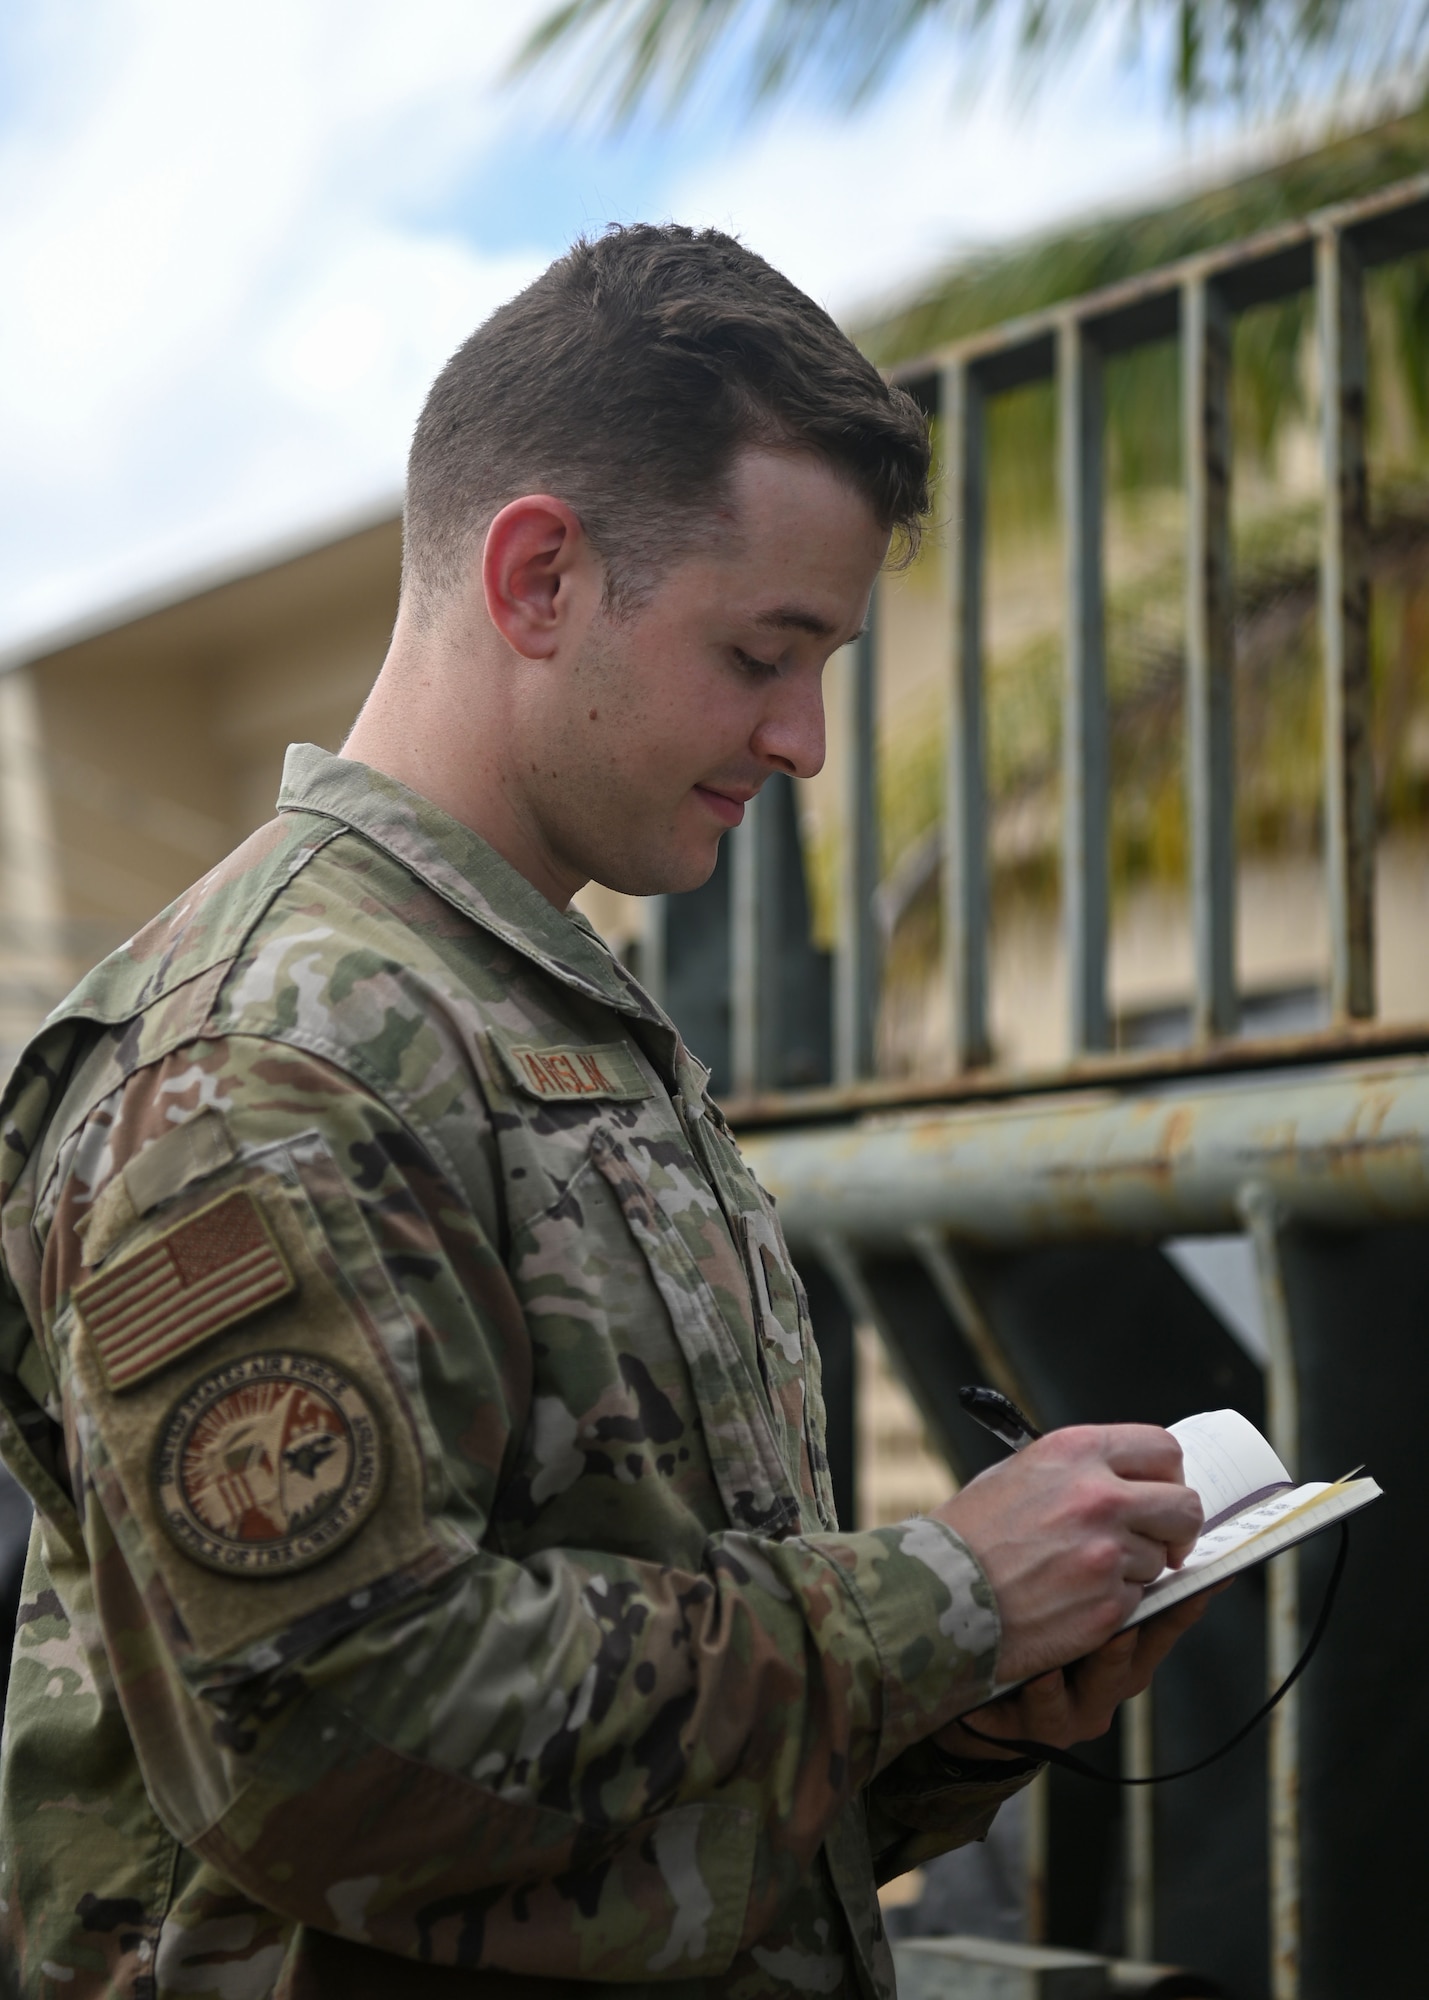 U.S. Air Force 1st Lt. Colin Zavislak, lead member of the Project Arc cohort in the Pacific Air Forces region, writes notes while on a walk-through of the 36th Contingency Response Squadron at Andersen Air Force Base, Guam, Jan. 30th, 2023. There is a new program emerging across the Air Force called Project Arc, which enables a few select uniformed scientists and engineers to work directly with operational users to solve problems at the point of impact. Zavislak and two others in the cohort are the first Project Arc team to enter the Pacific Air Forces, spending six months among three bases in the region. (U.S. Air Force photo by Staff Sgt. Aubree Owens)